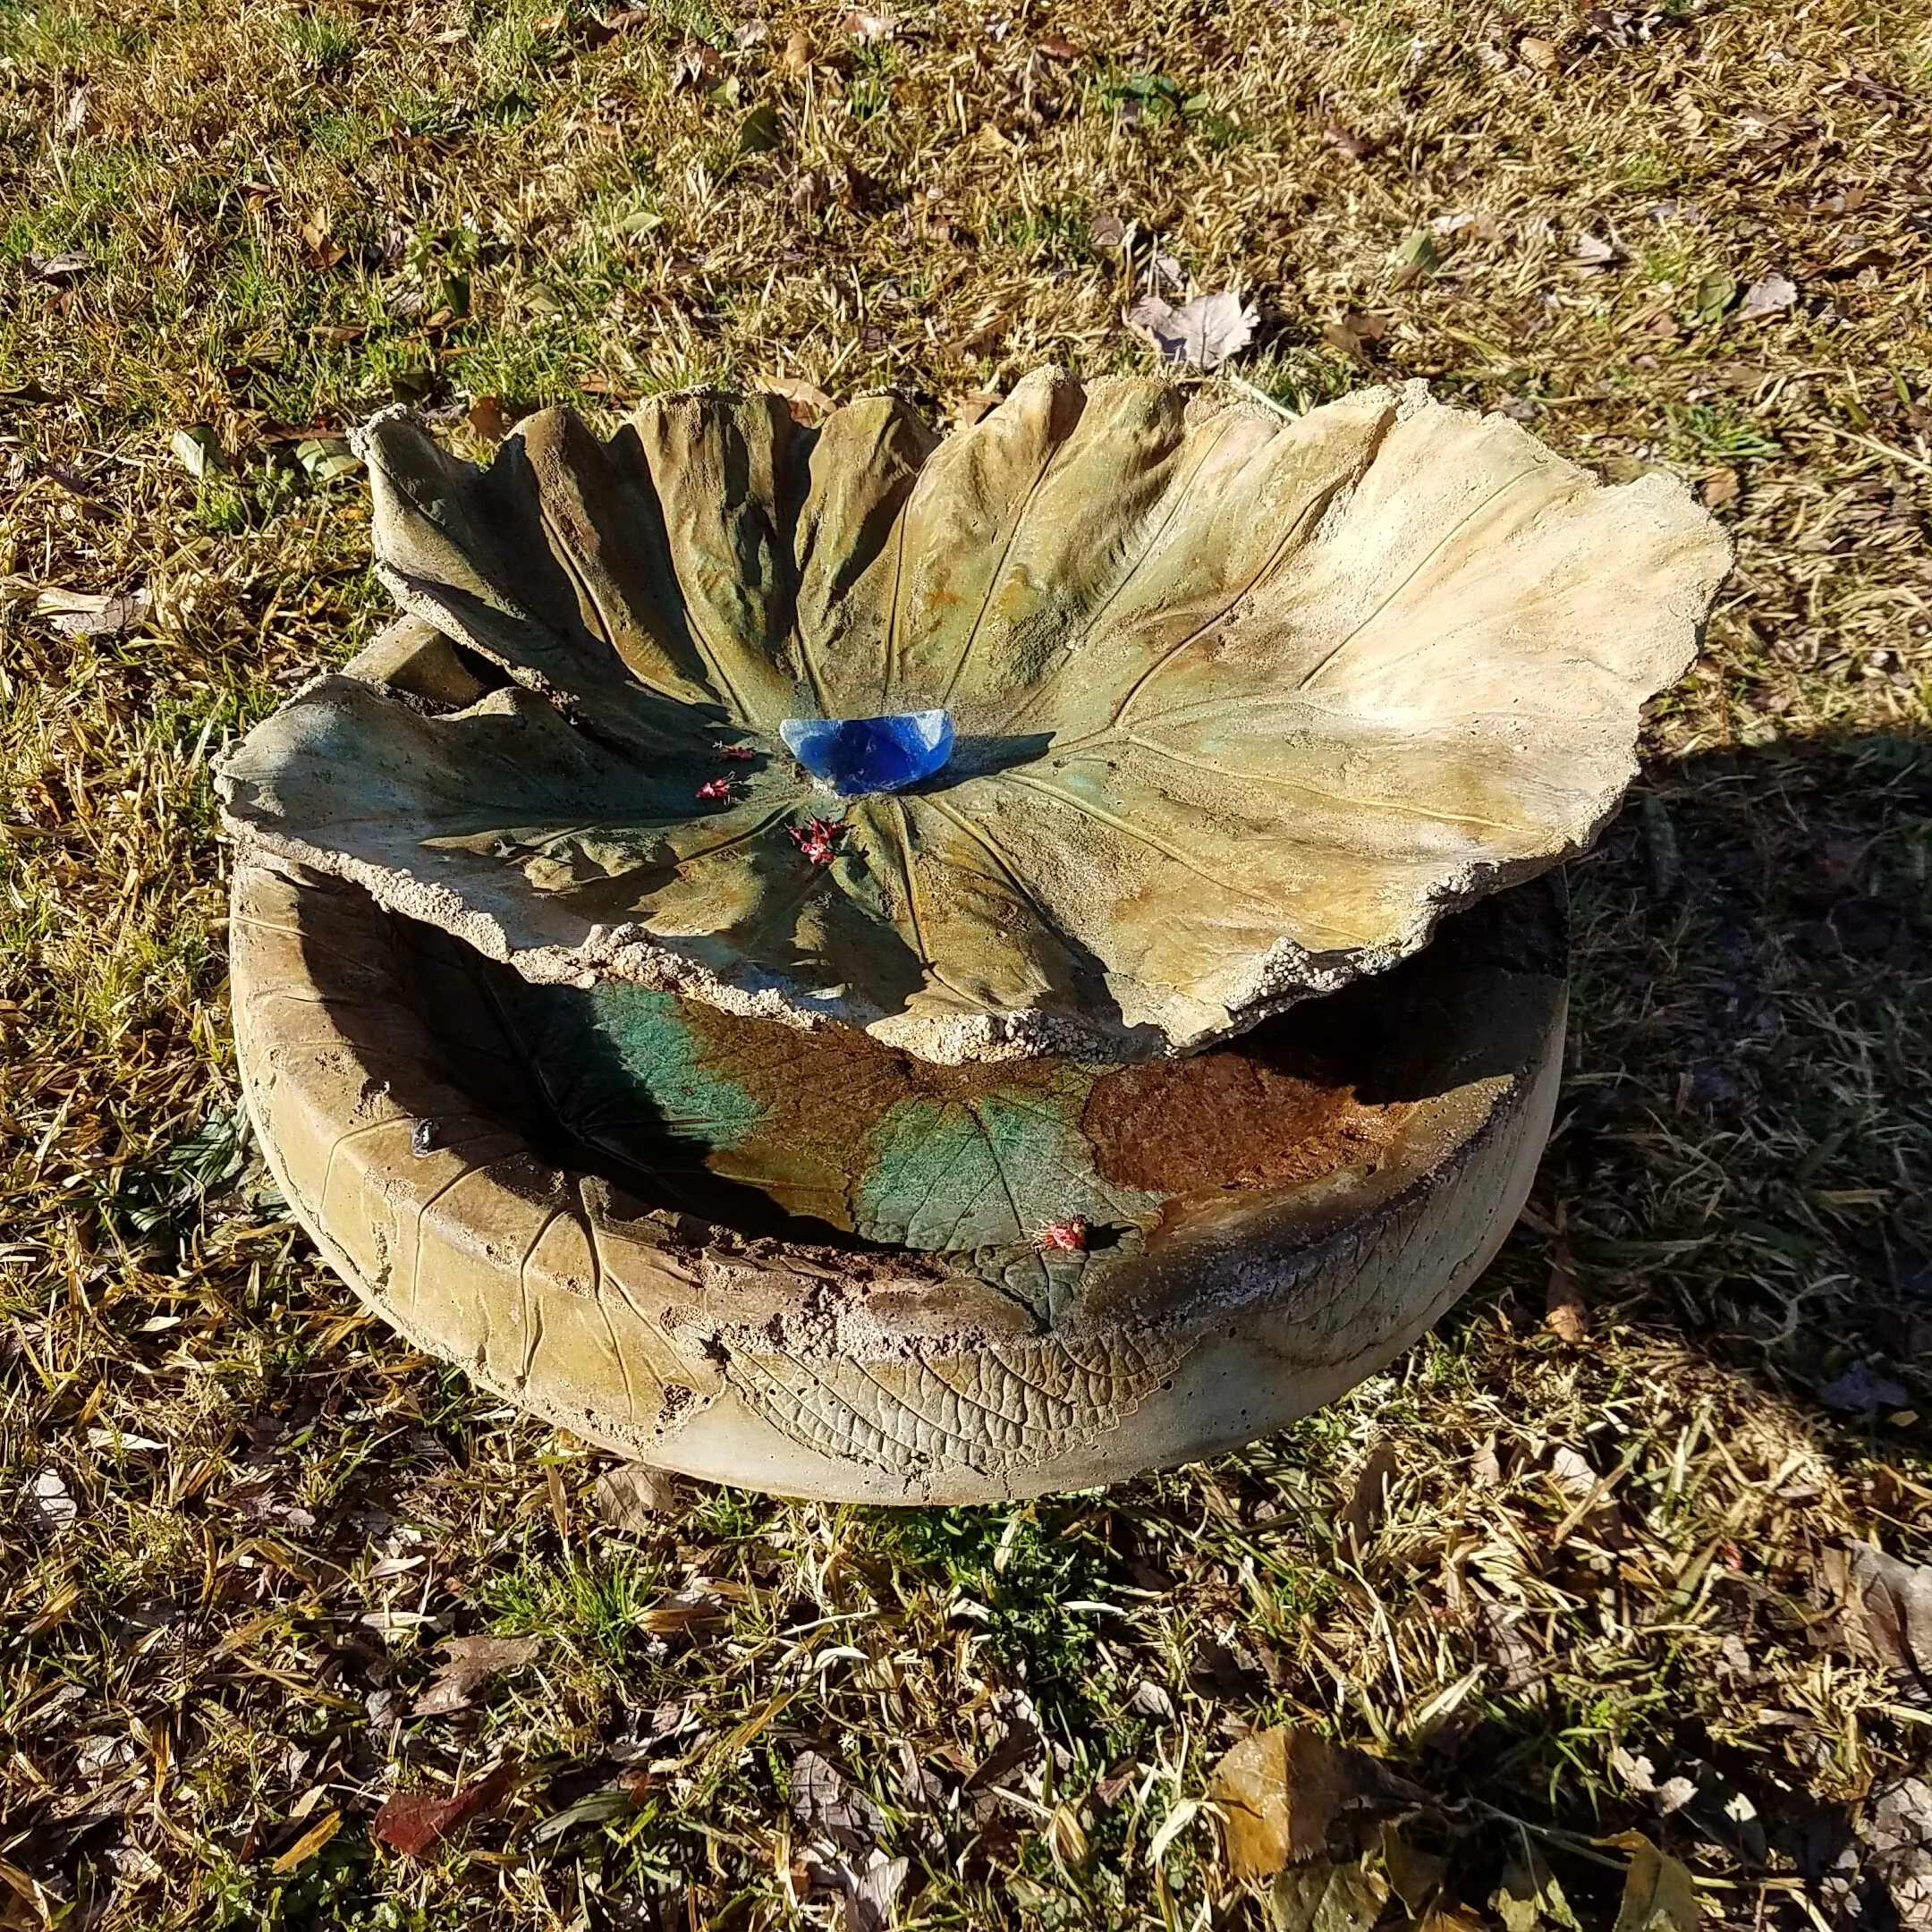 A picturesque bird bath stained with Shifting Sand acid stains for the base and Azure Blue accents highlighting its artistic features. The bird bath is structured like a bowl, with a large, intricately designed concrete leaf mounted on top, providing an inviting spot for the birds.